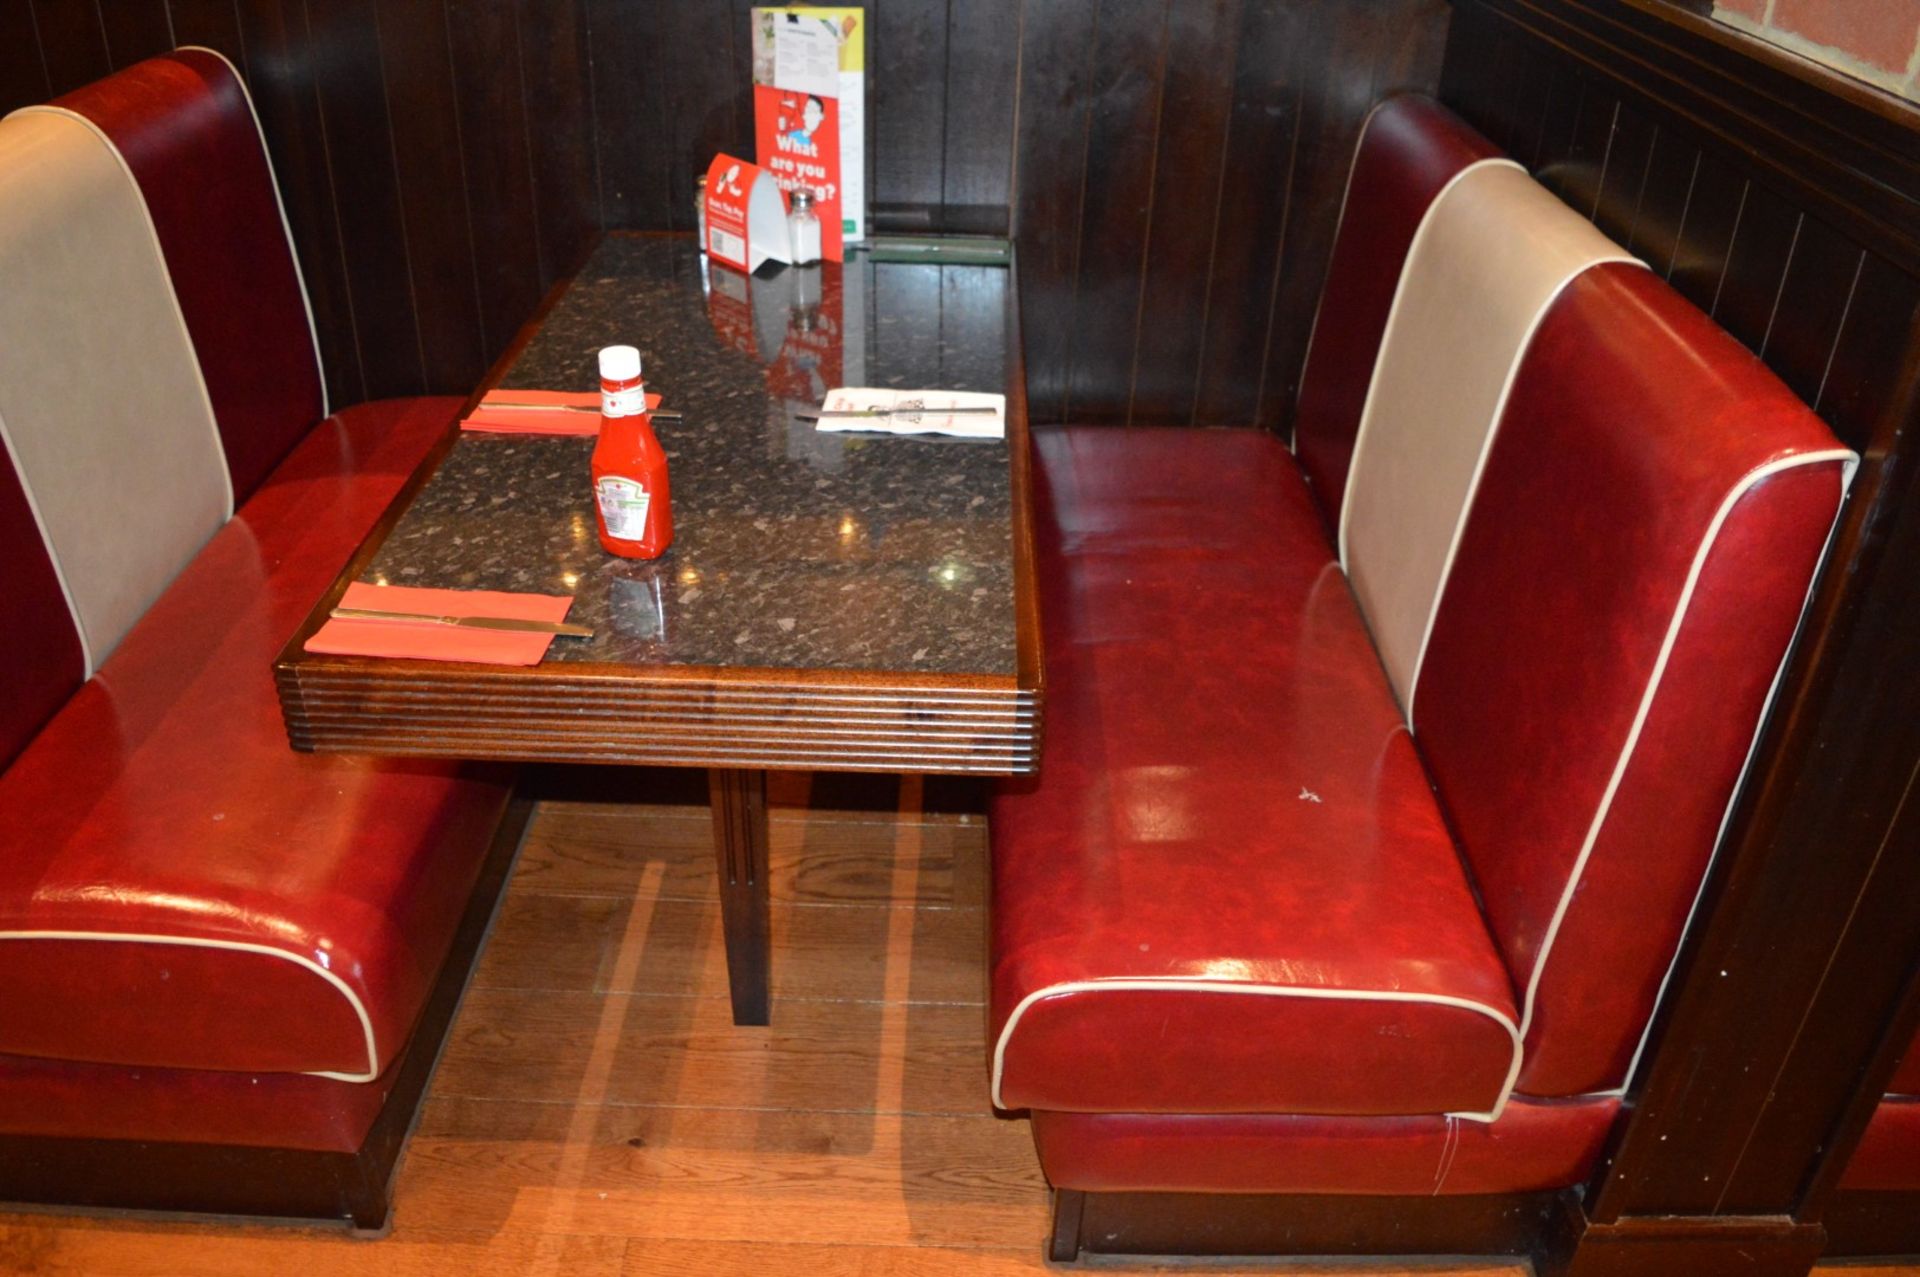 1 x Selection of Seating Booths in a 1950's Retro American Diner Design Supplied in Good Condition - - Image 2 of 7